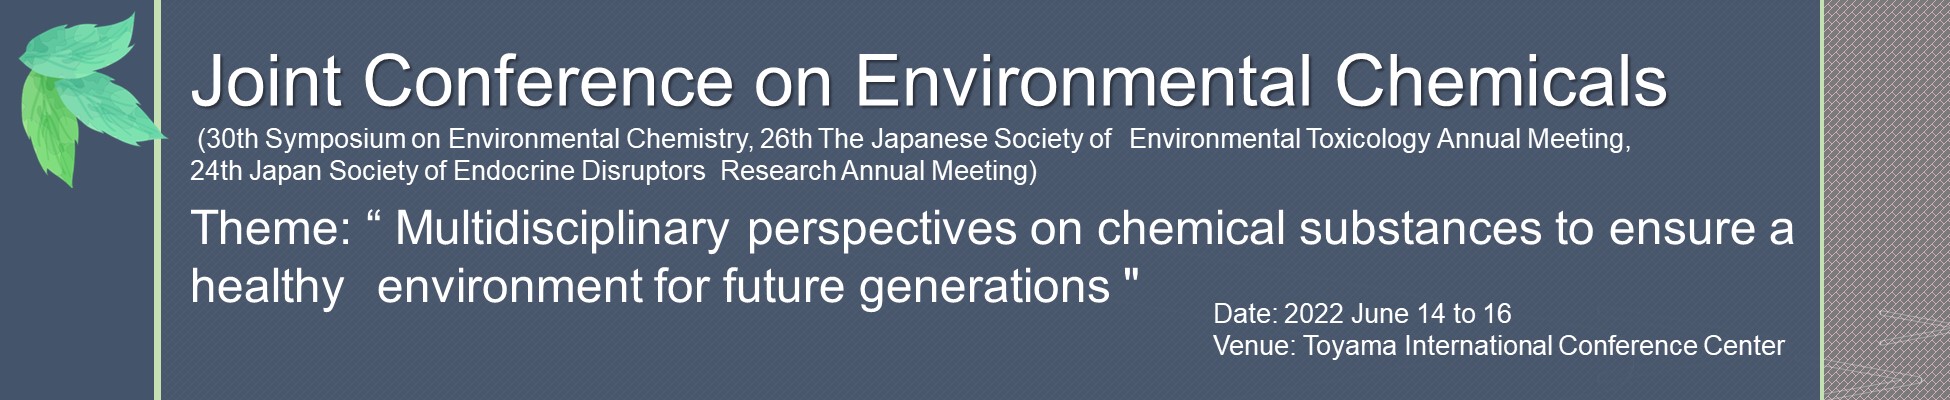 Joint Conference on Environmental Chemicals